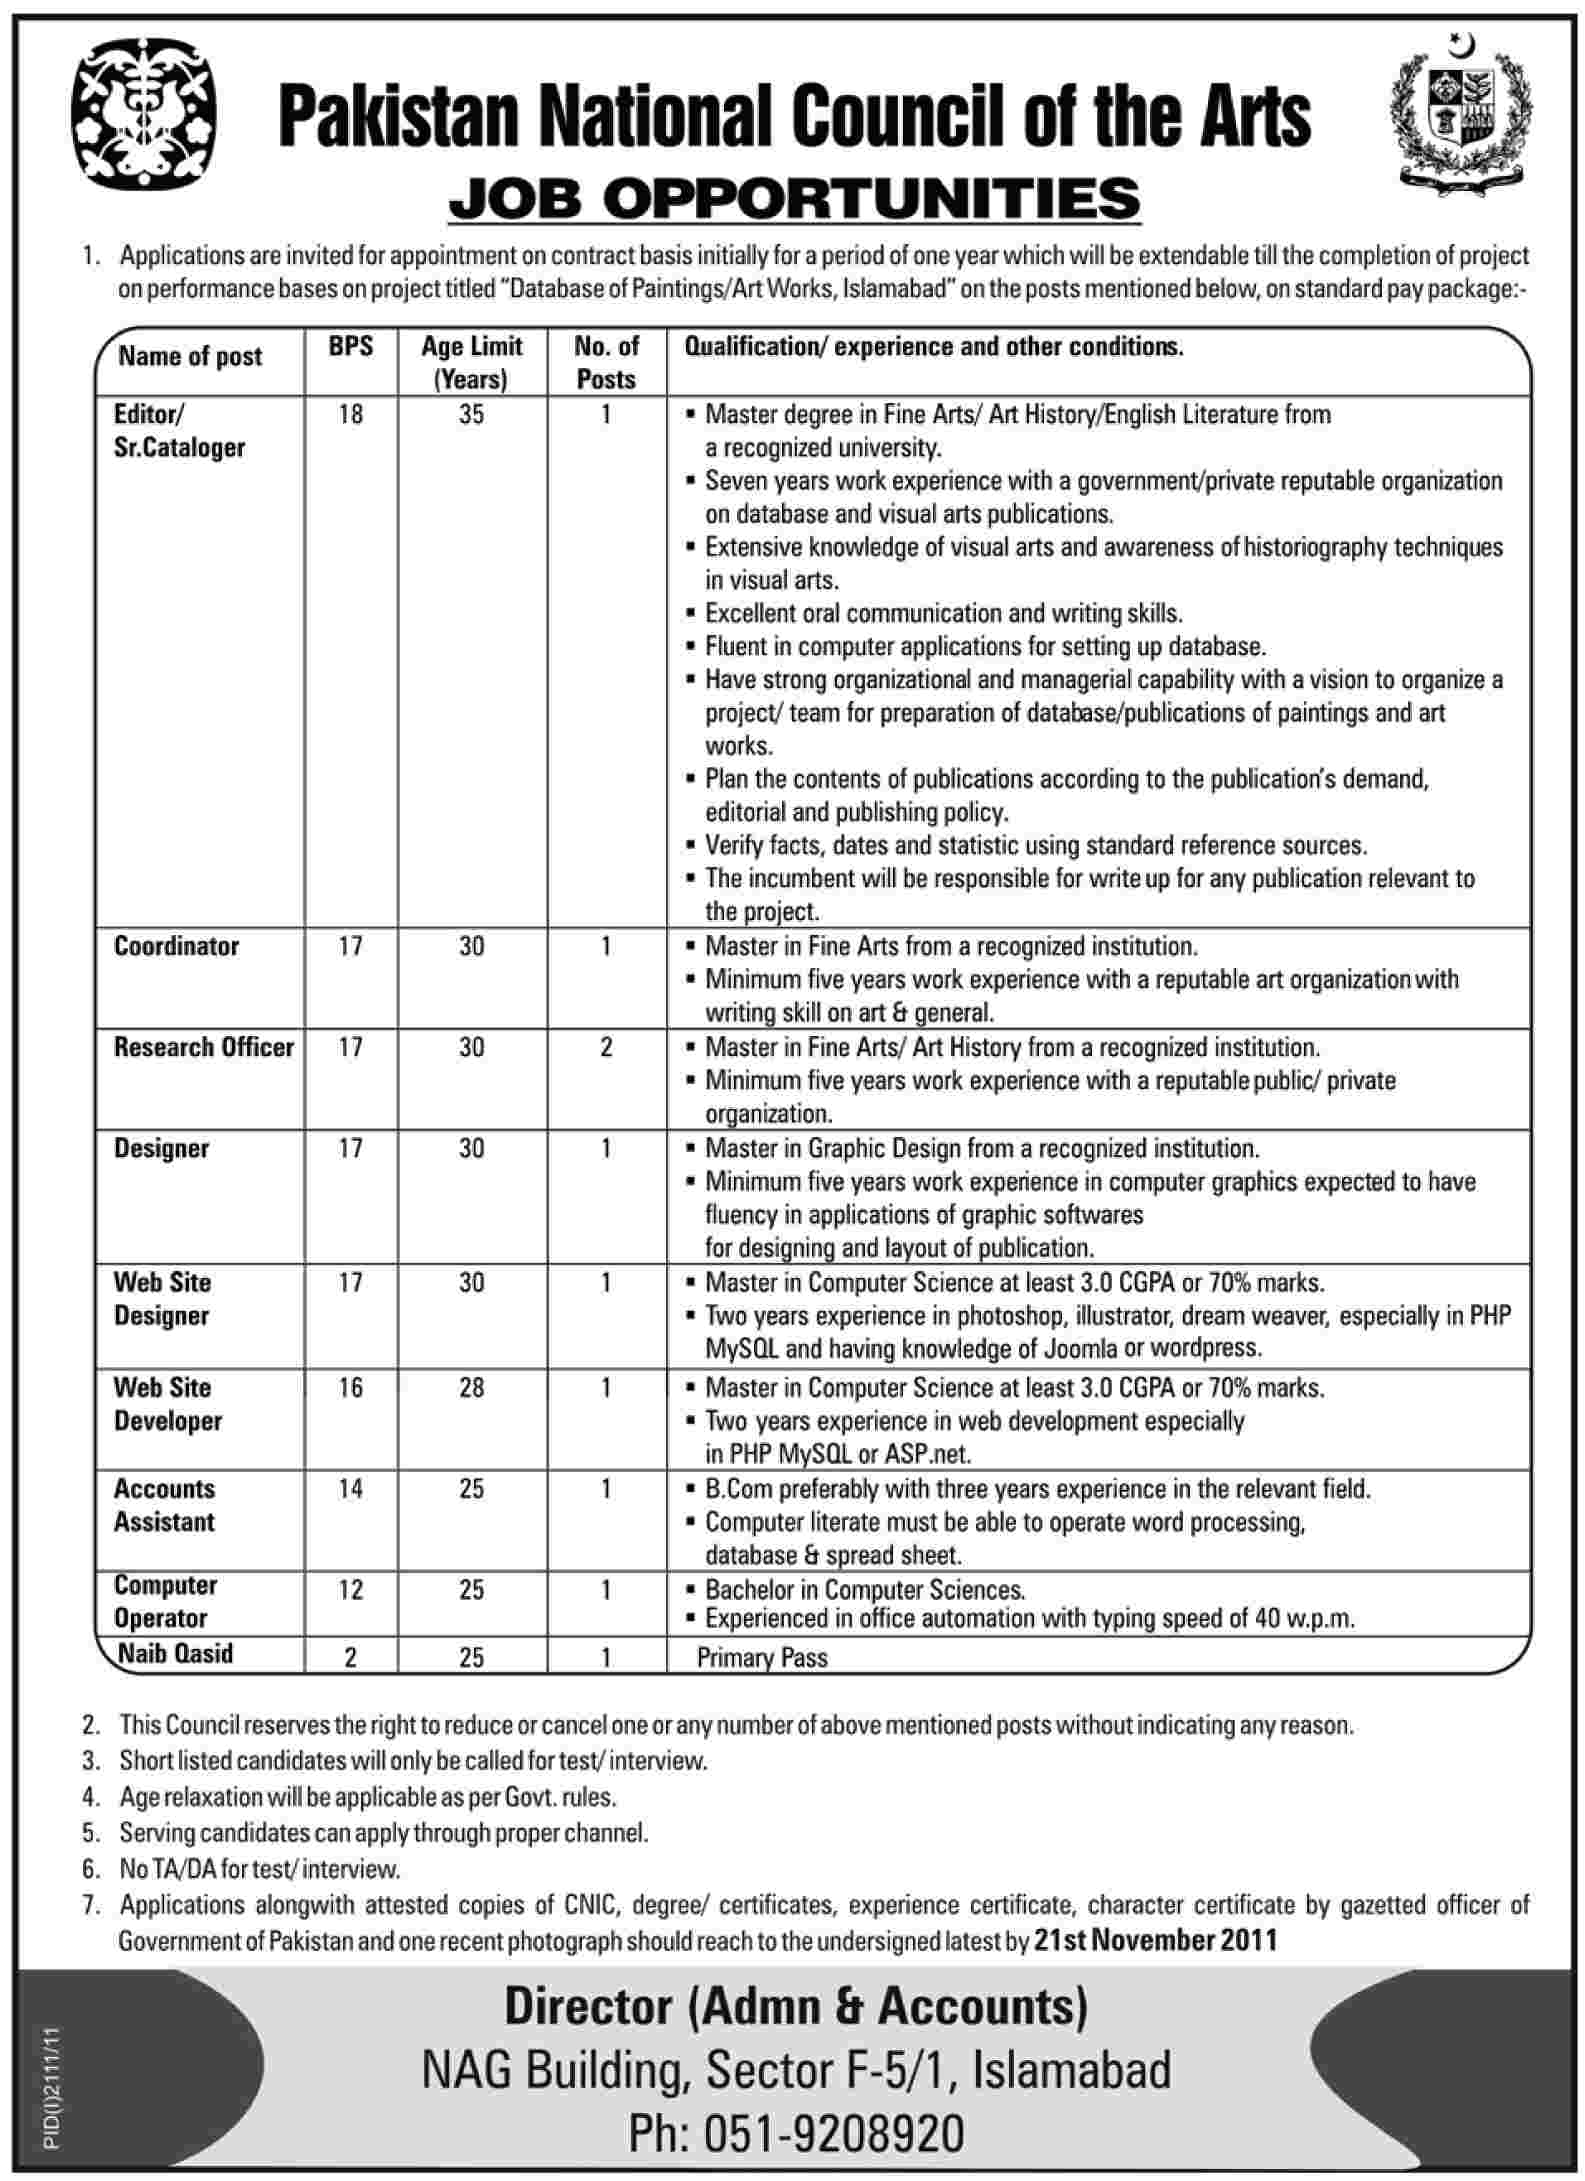 Pakistan National Council of the Art Jobs Opportunity